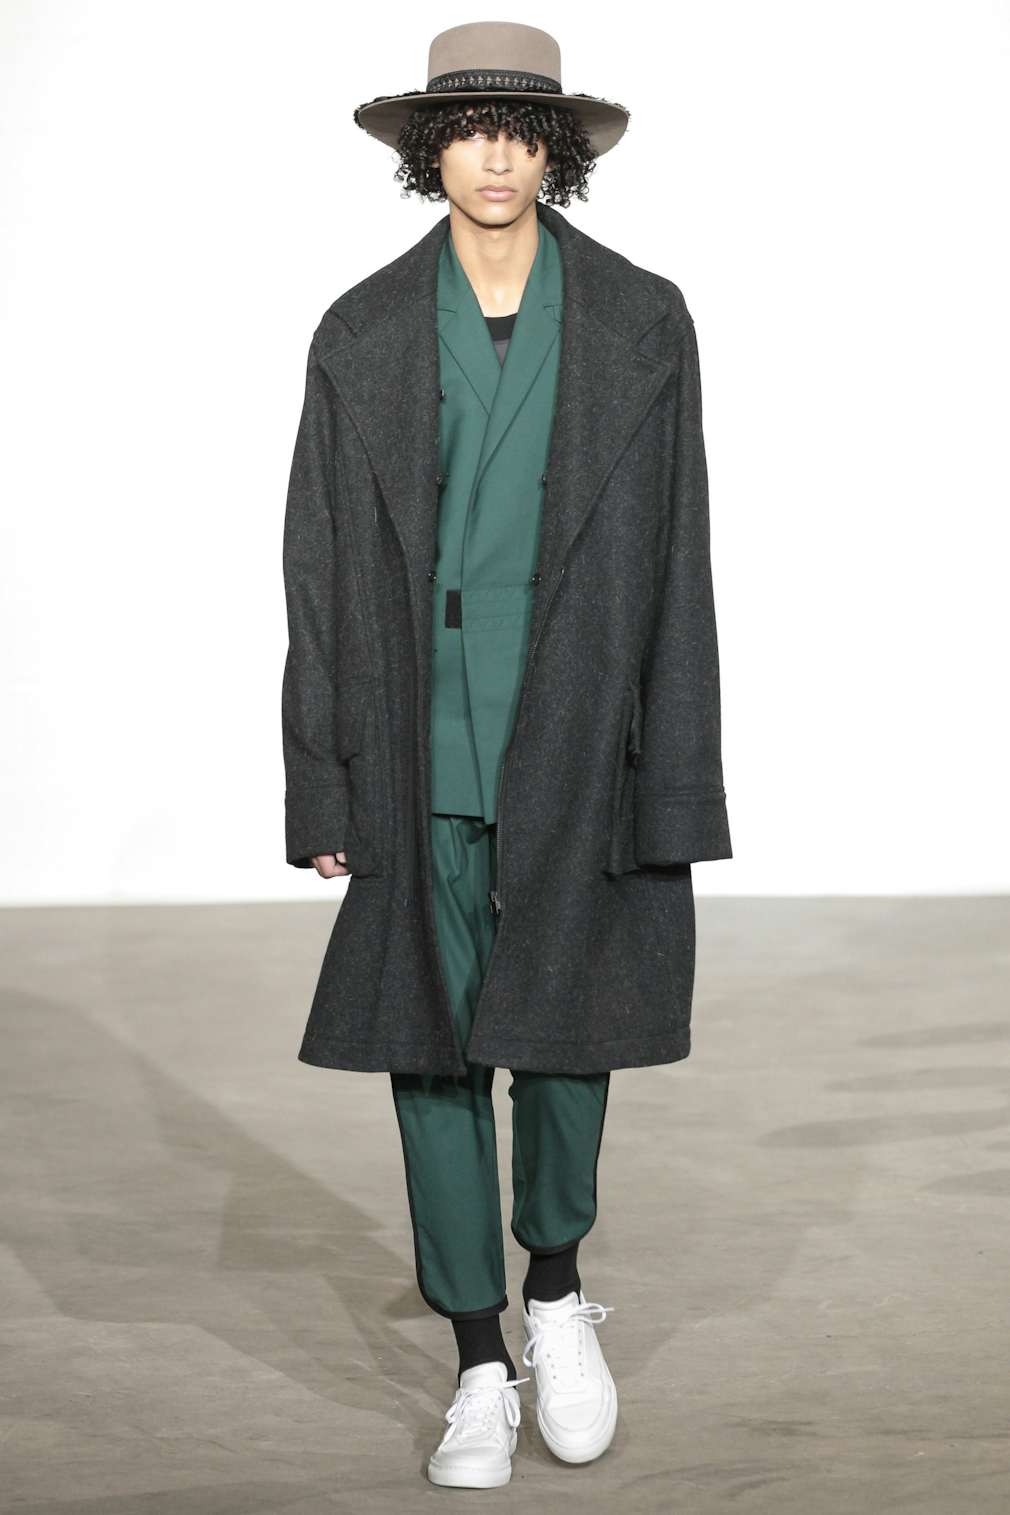 Clothing designer Dao-Yi Chow attends the Pyer Moss runway show